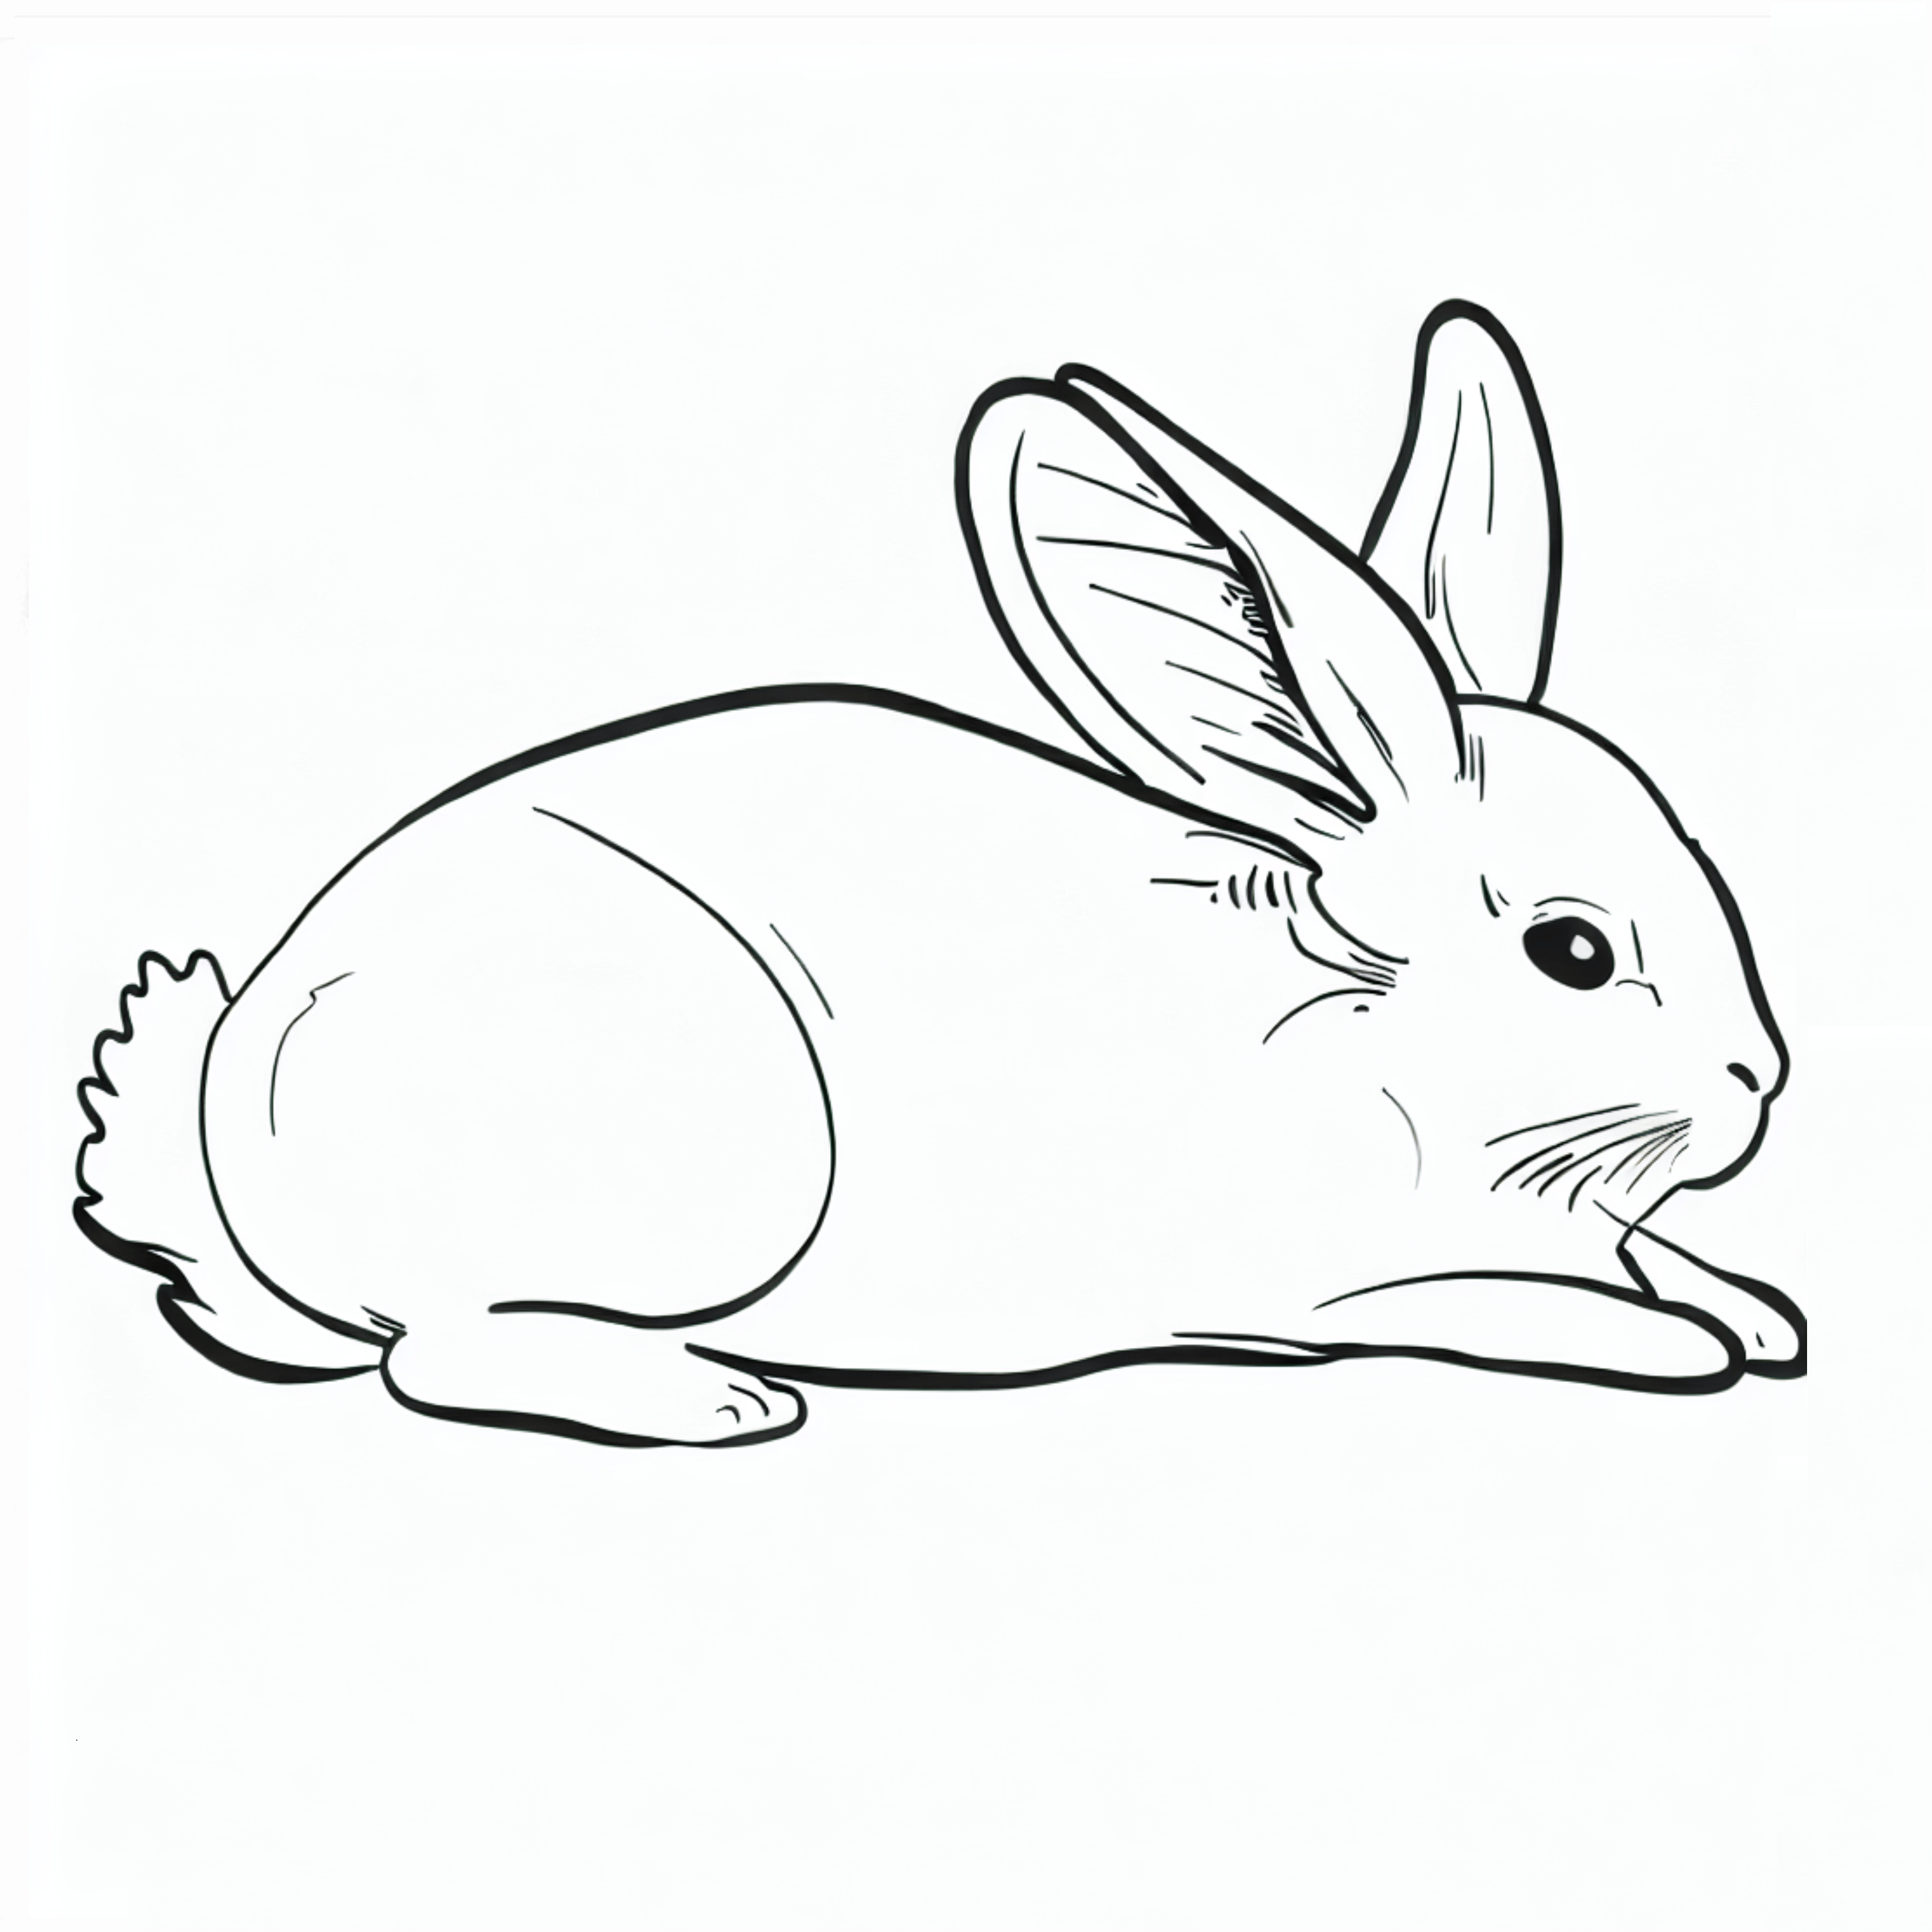 Line drawing of a rabbit